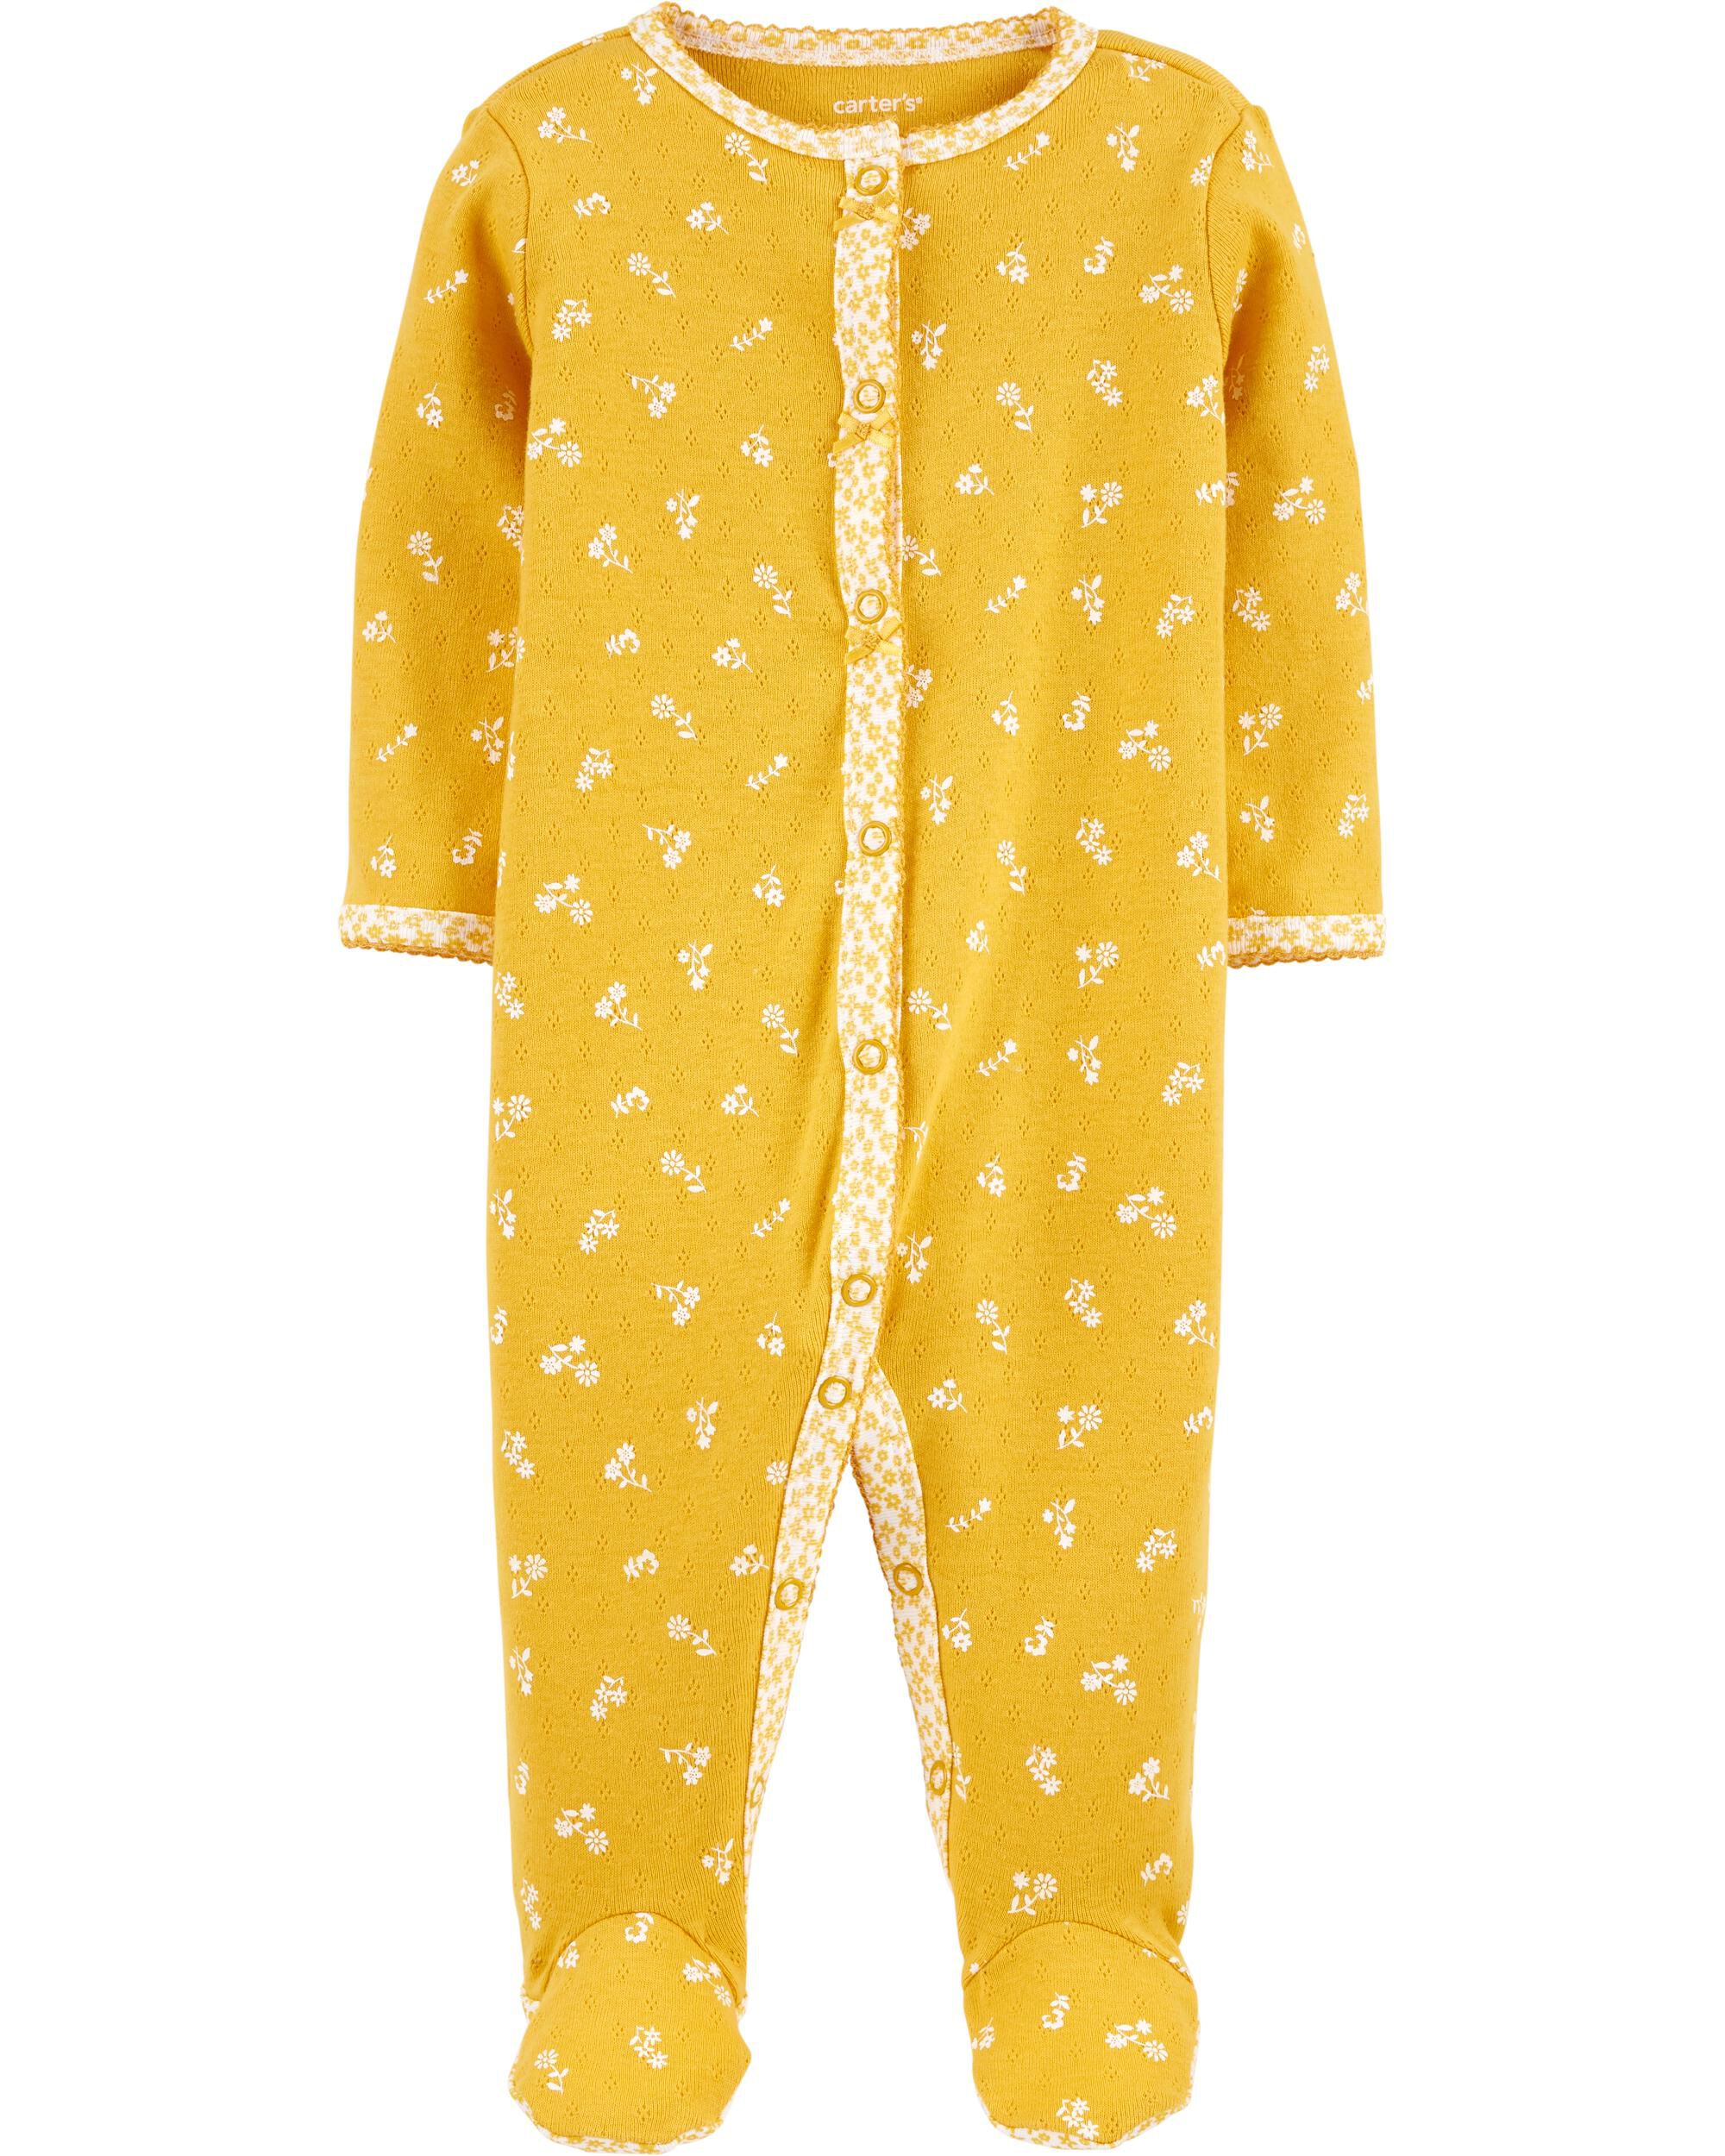  *CLEARANCE* Floral Snap-Up Cotton Sleep & Play 